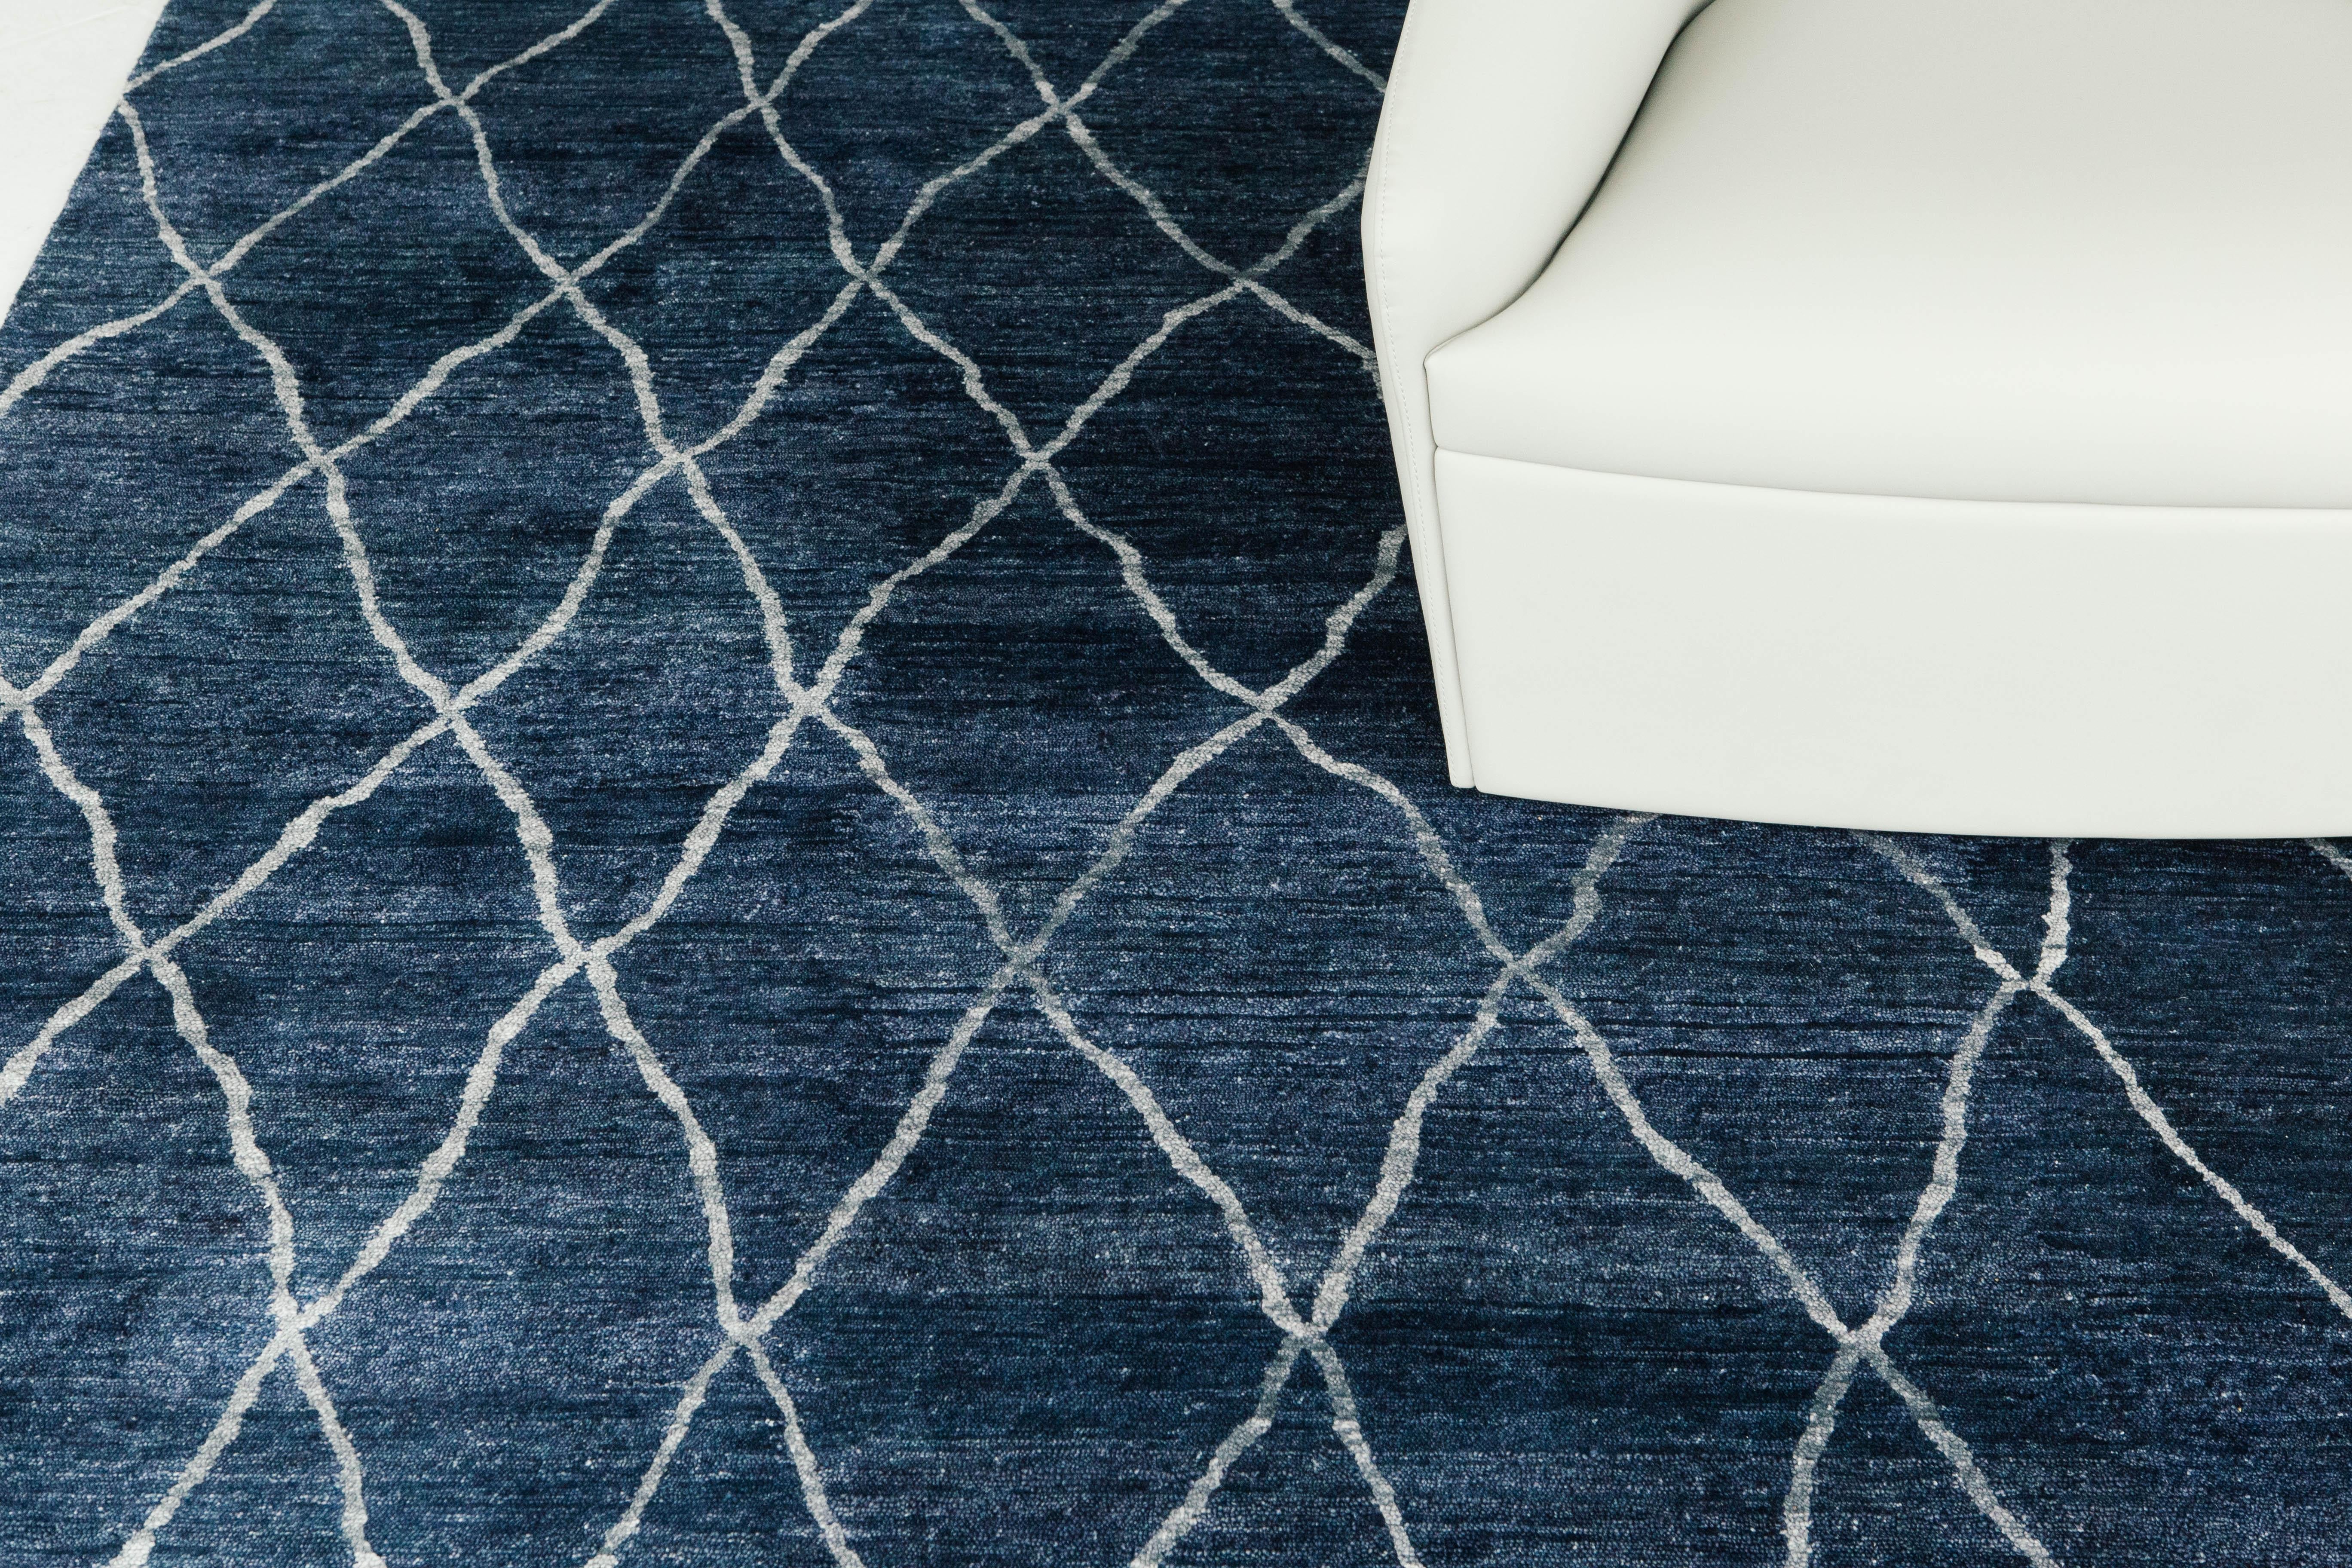 'Palisade' is the perfect bamboo silk rug in a deep ocean blue. The rug's sheen and organic light blue line work truly gives the rug an effortlessly chic and luxurious look. Palisade's lustrous silks bring movement to the rug like ocean waves